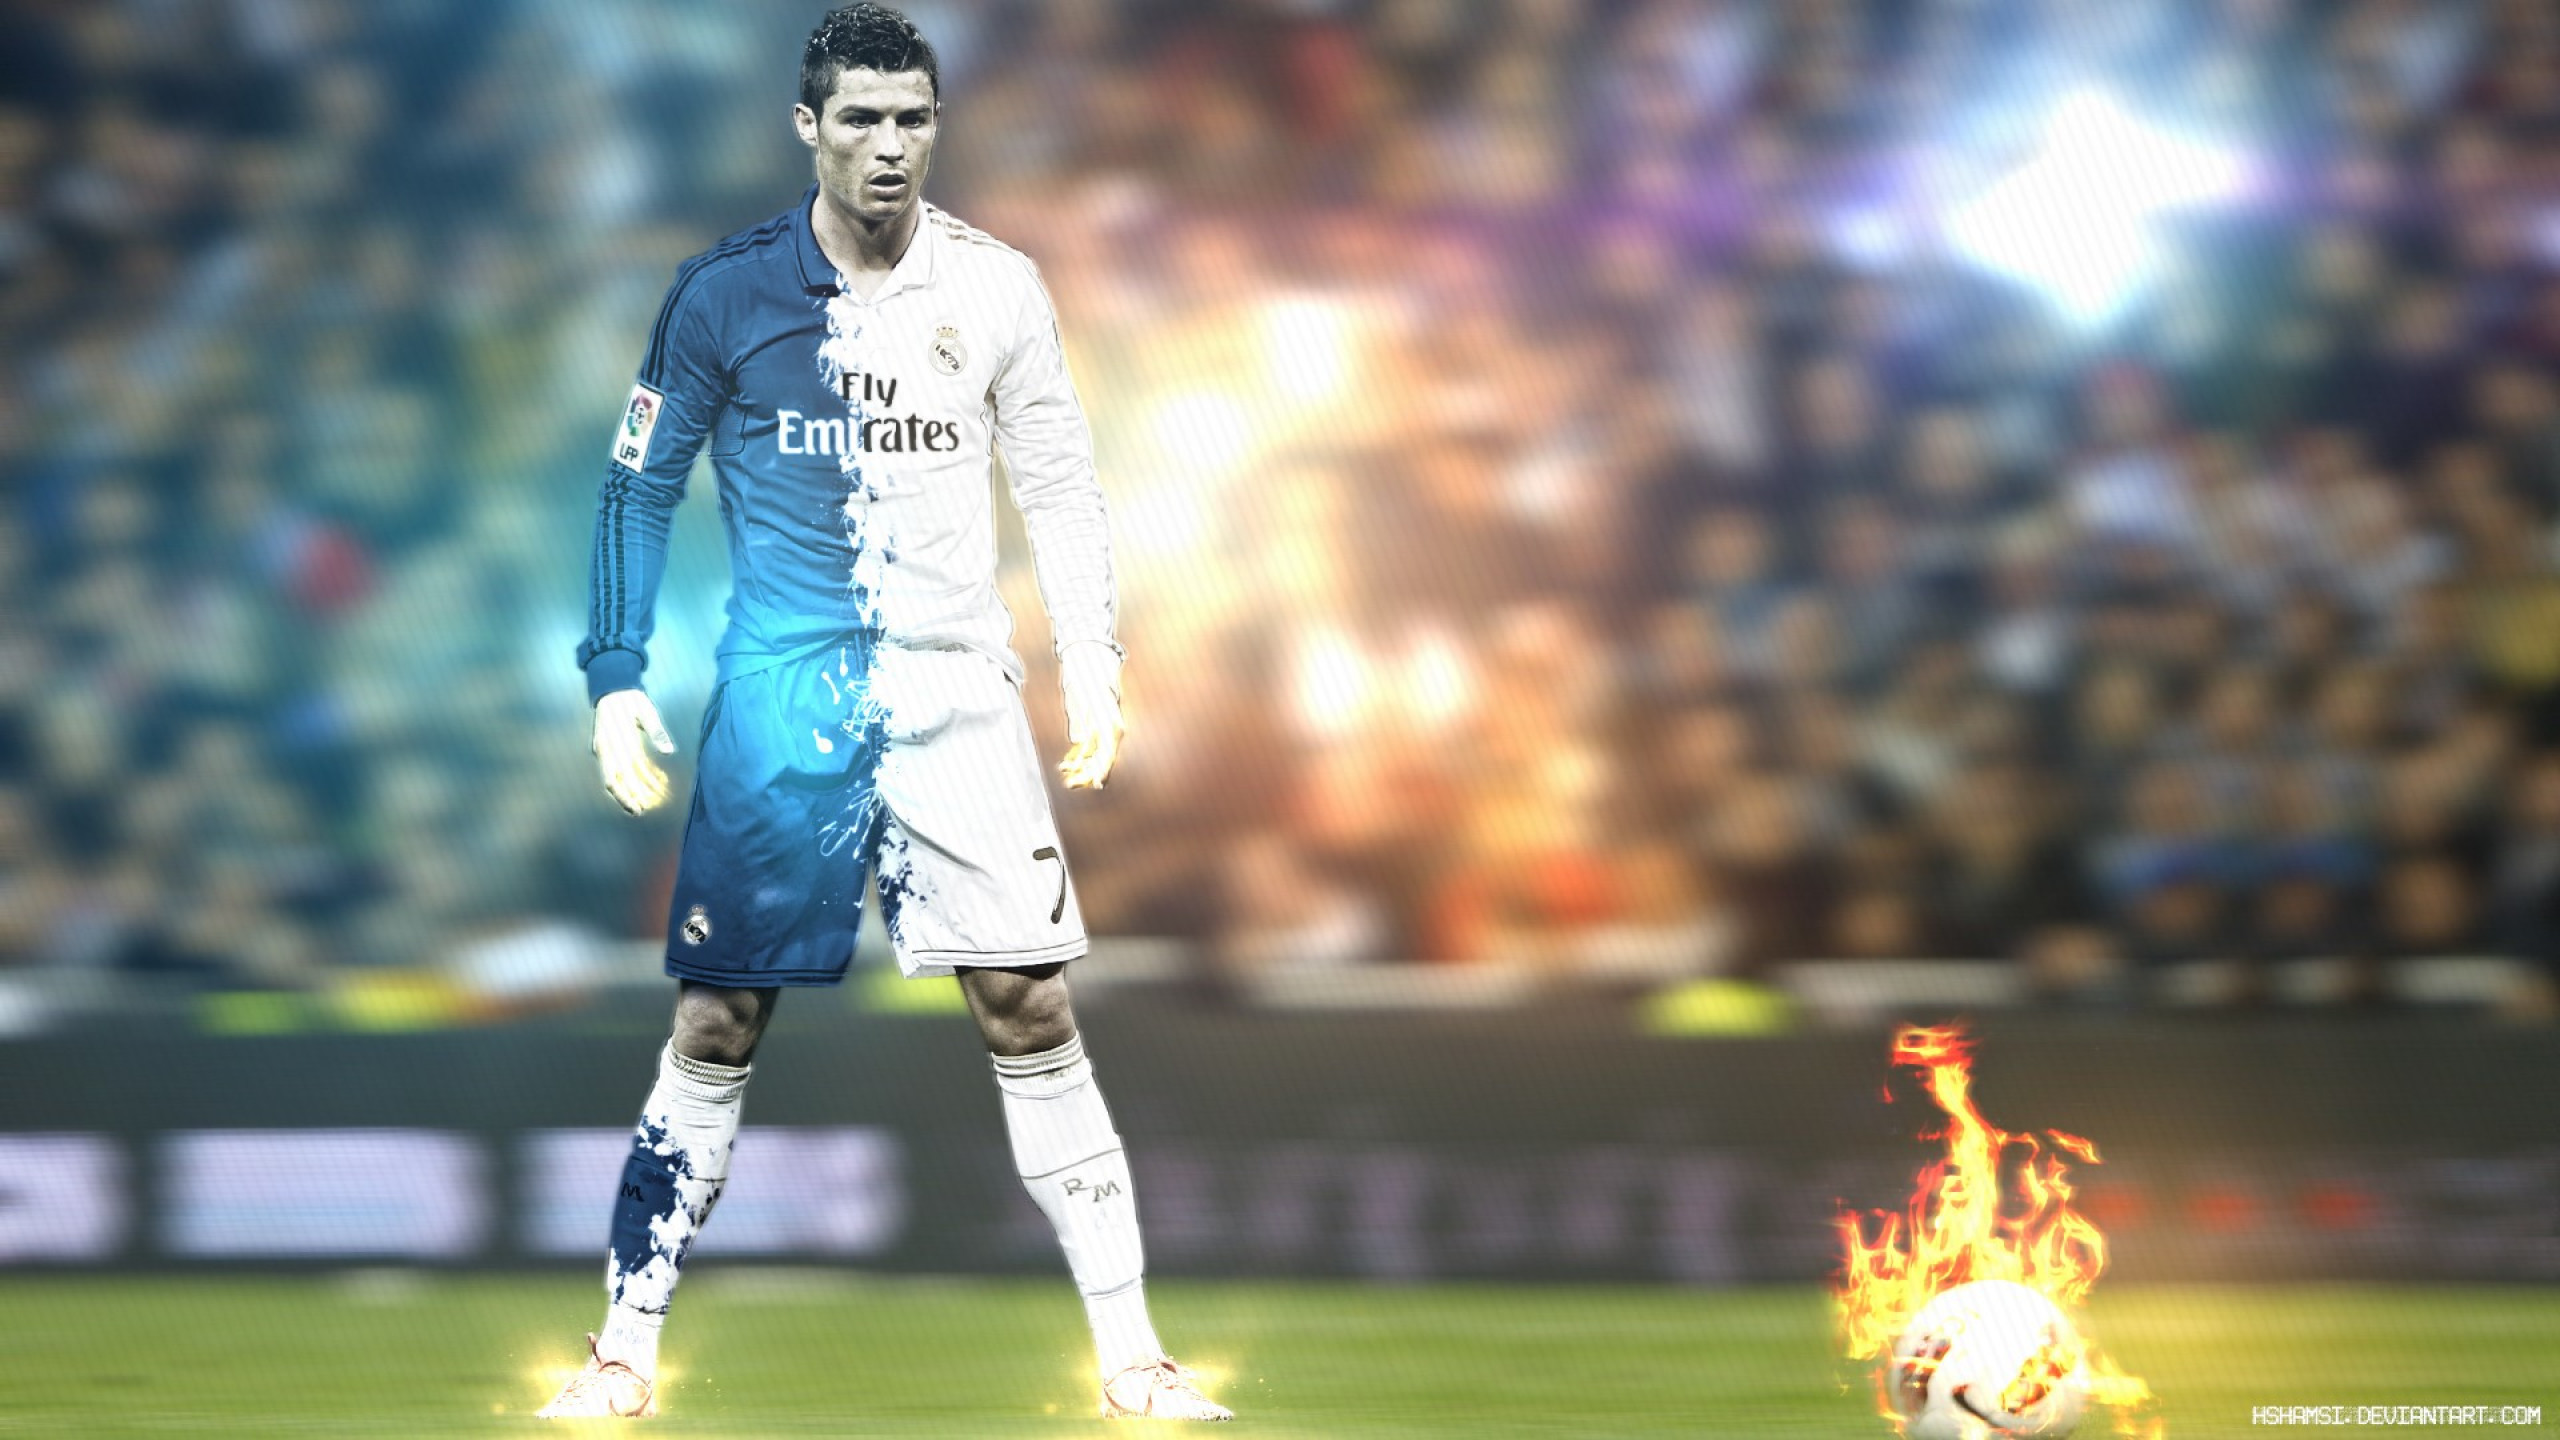 2560x1440 CR7 Wallpaper 2018 (79 images) Cristiano Ronaldo Wallpapers 2016-2017 in HD  | Soccer | Football .